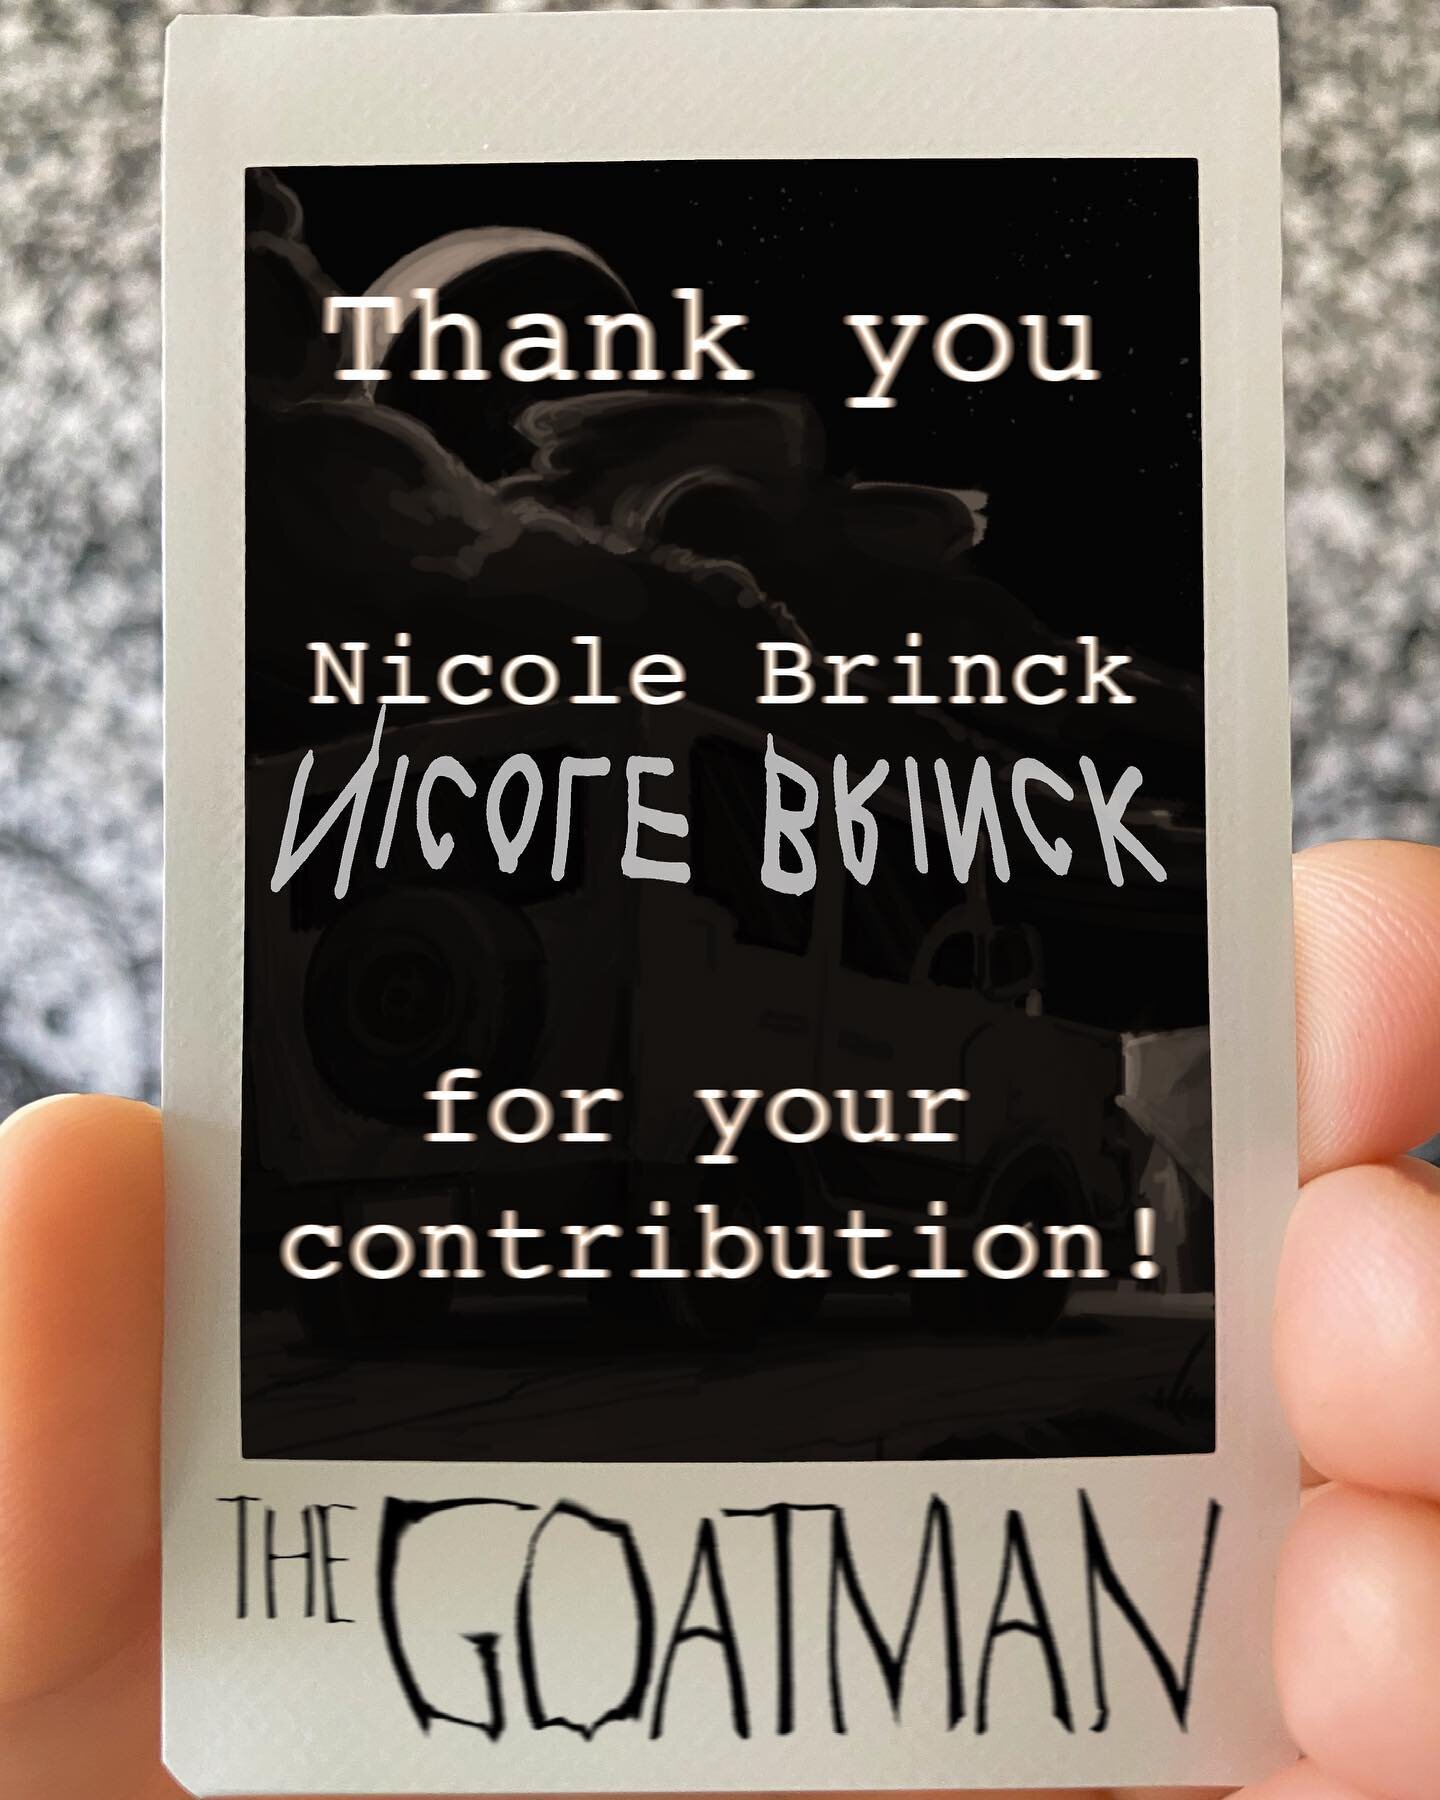 Thank you, Nicole, for contributing to the project and joining #teamhuman on thegoatmanmovie.com

You&rsquo;re amazing and we&rsquo;re so grateful to have you as a friend. Thanks for supporting the project and being a part of this process!